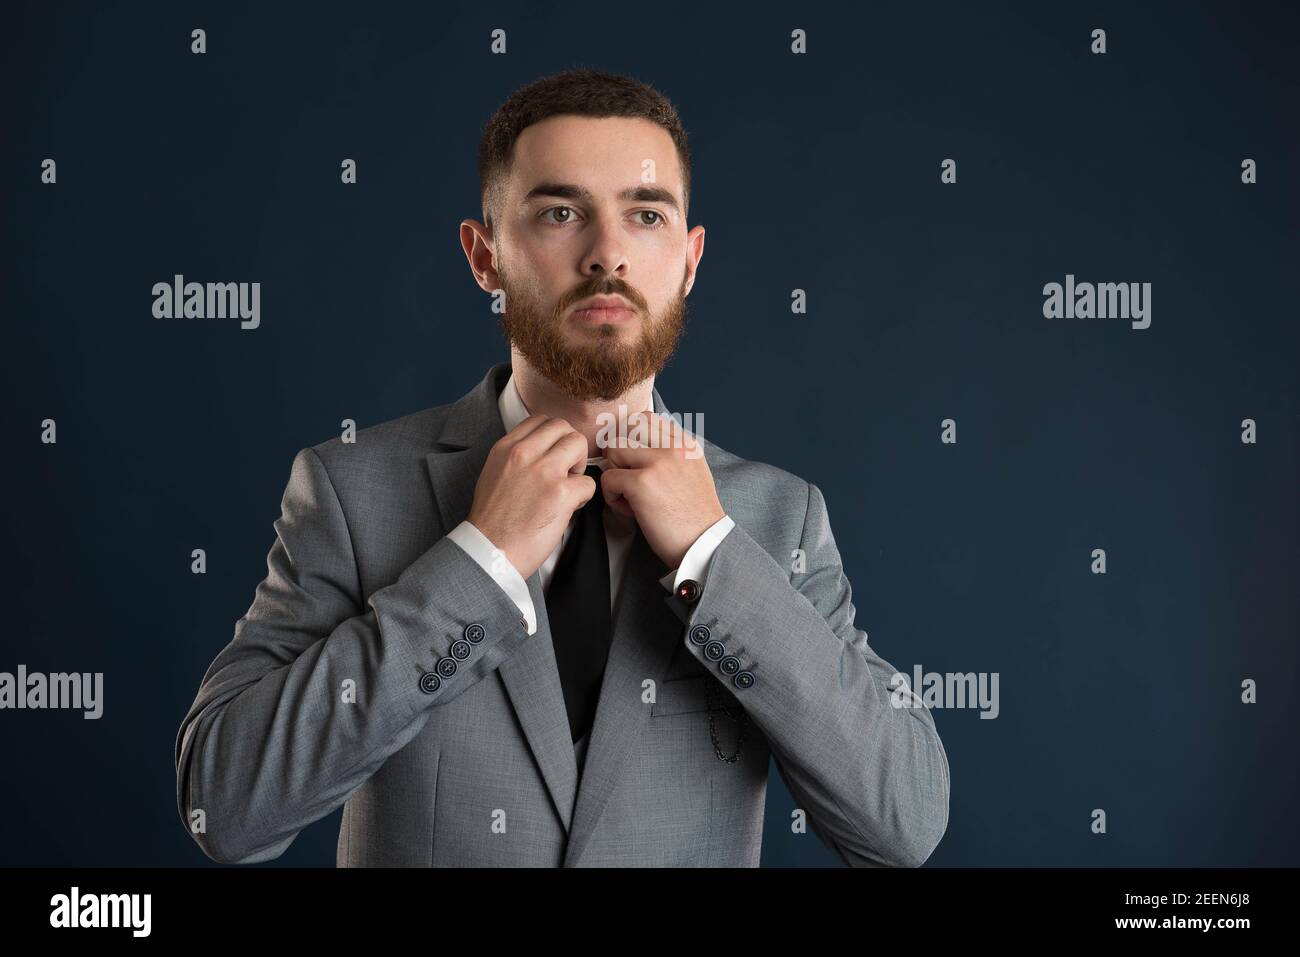 Handsome businessman fixing his black tie and shirt wearing a grey jacket Stock Photo